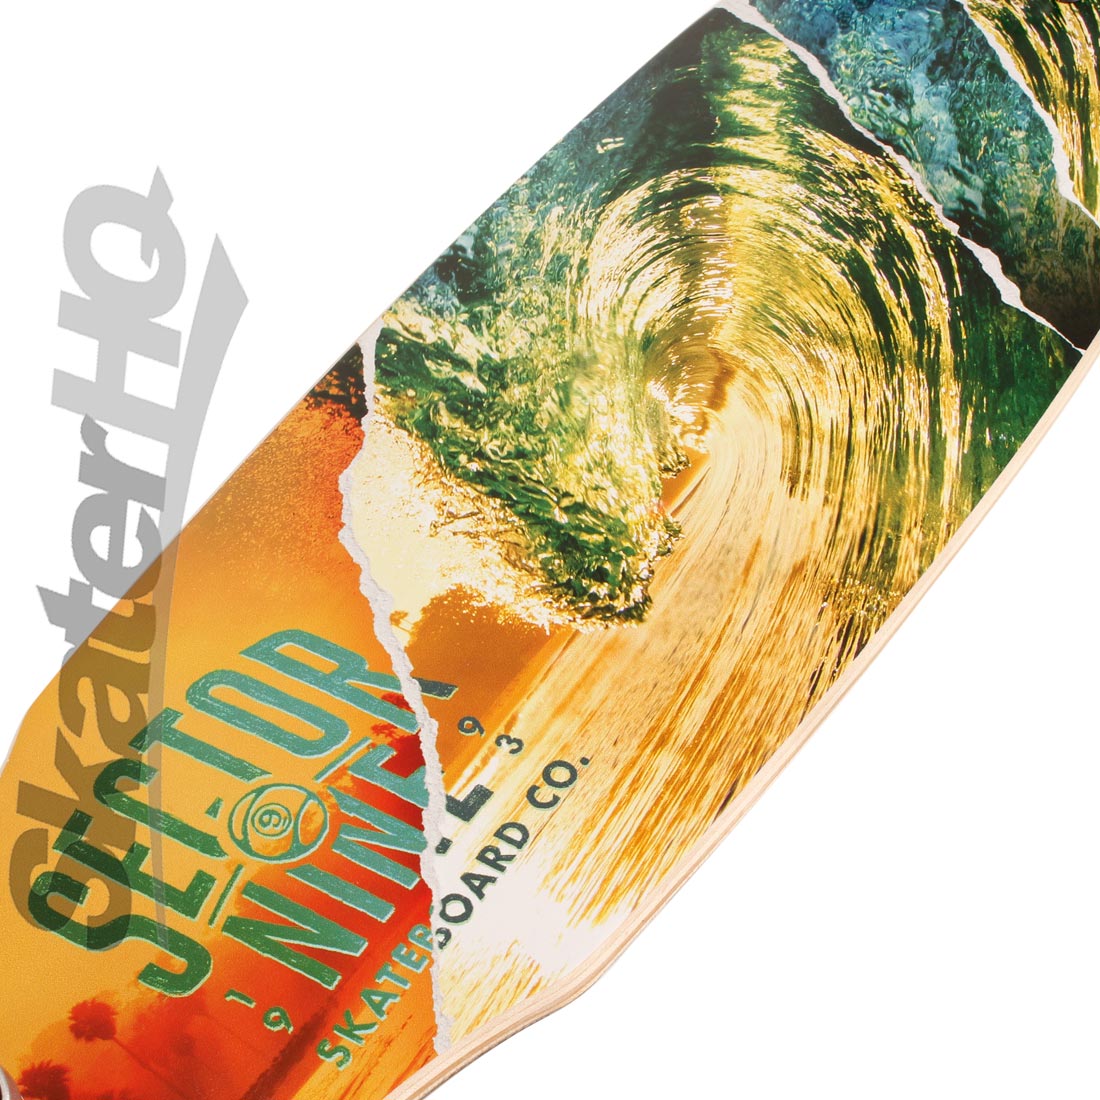 Sector 9 Chamber 33 Complete - Sidewinder Skateboard Completes Longboards